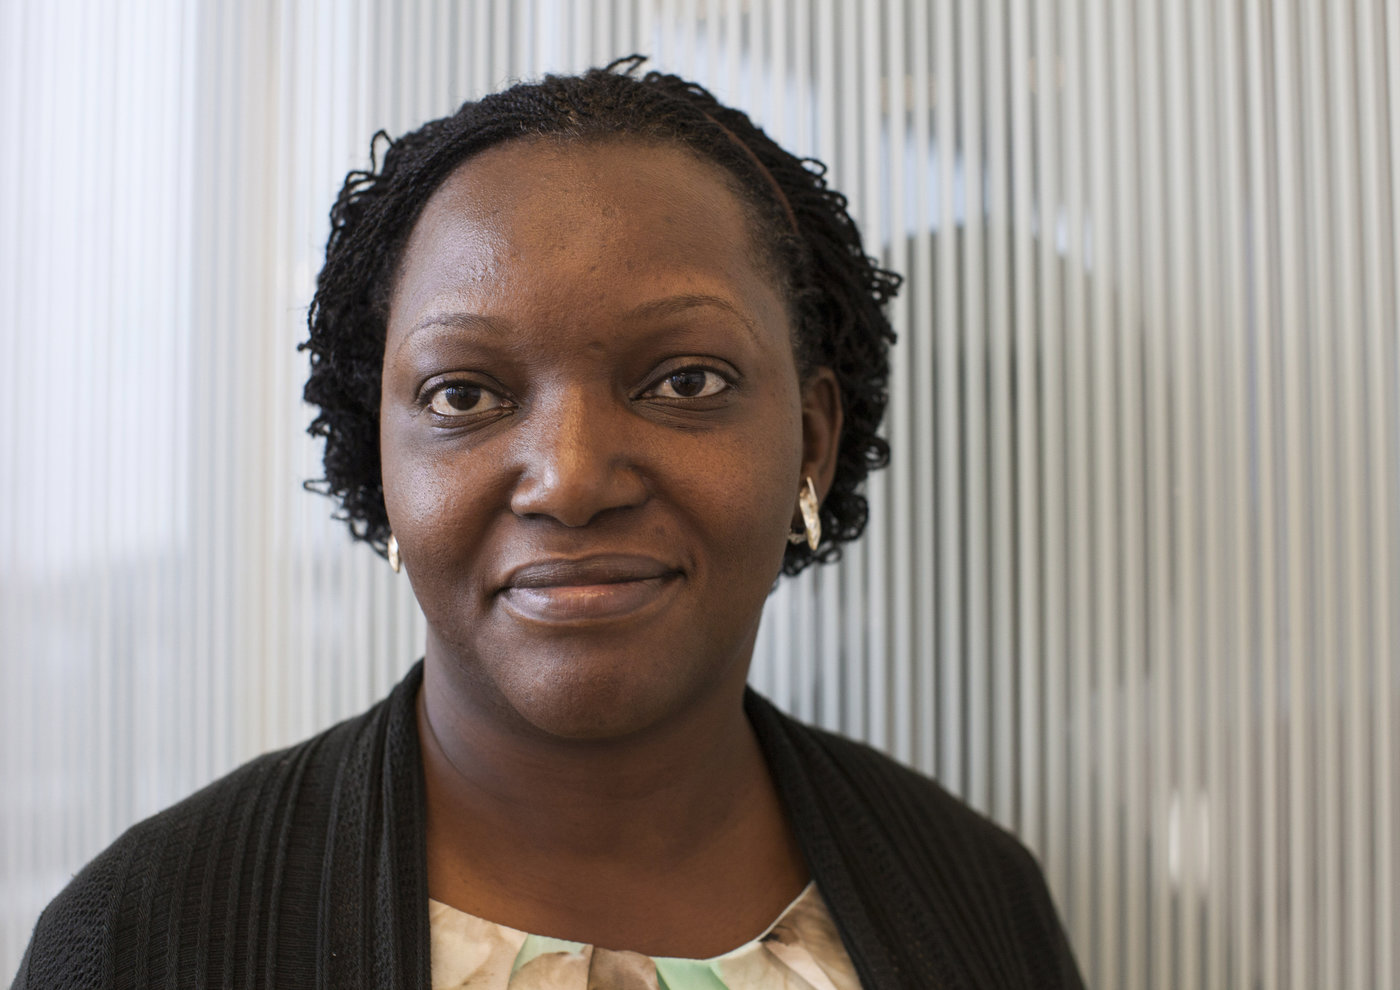 Dr. Etheldreda Nakimuli-Mpungu is one of this year's winners of the Elsevier Foundation Award for female scientists in the developing world.